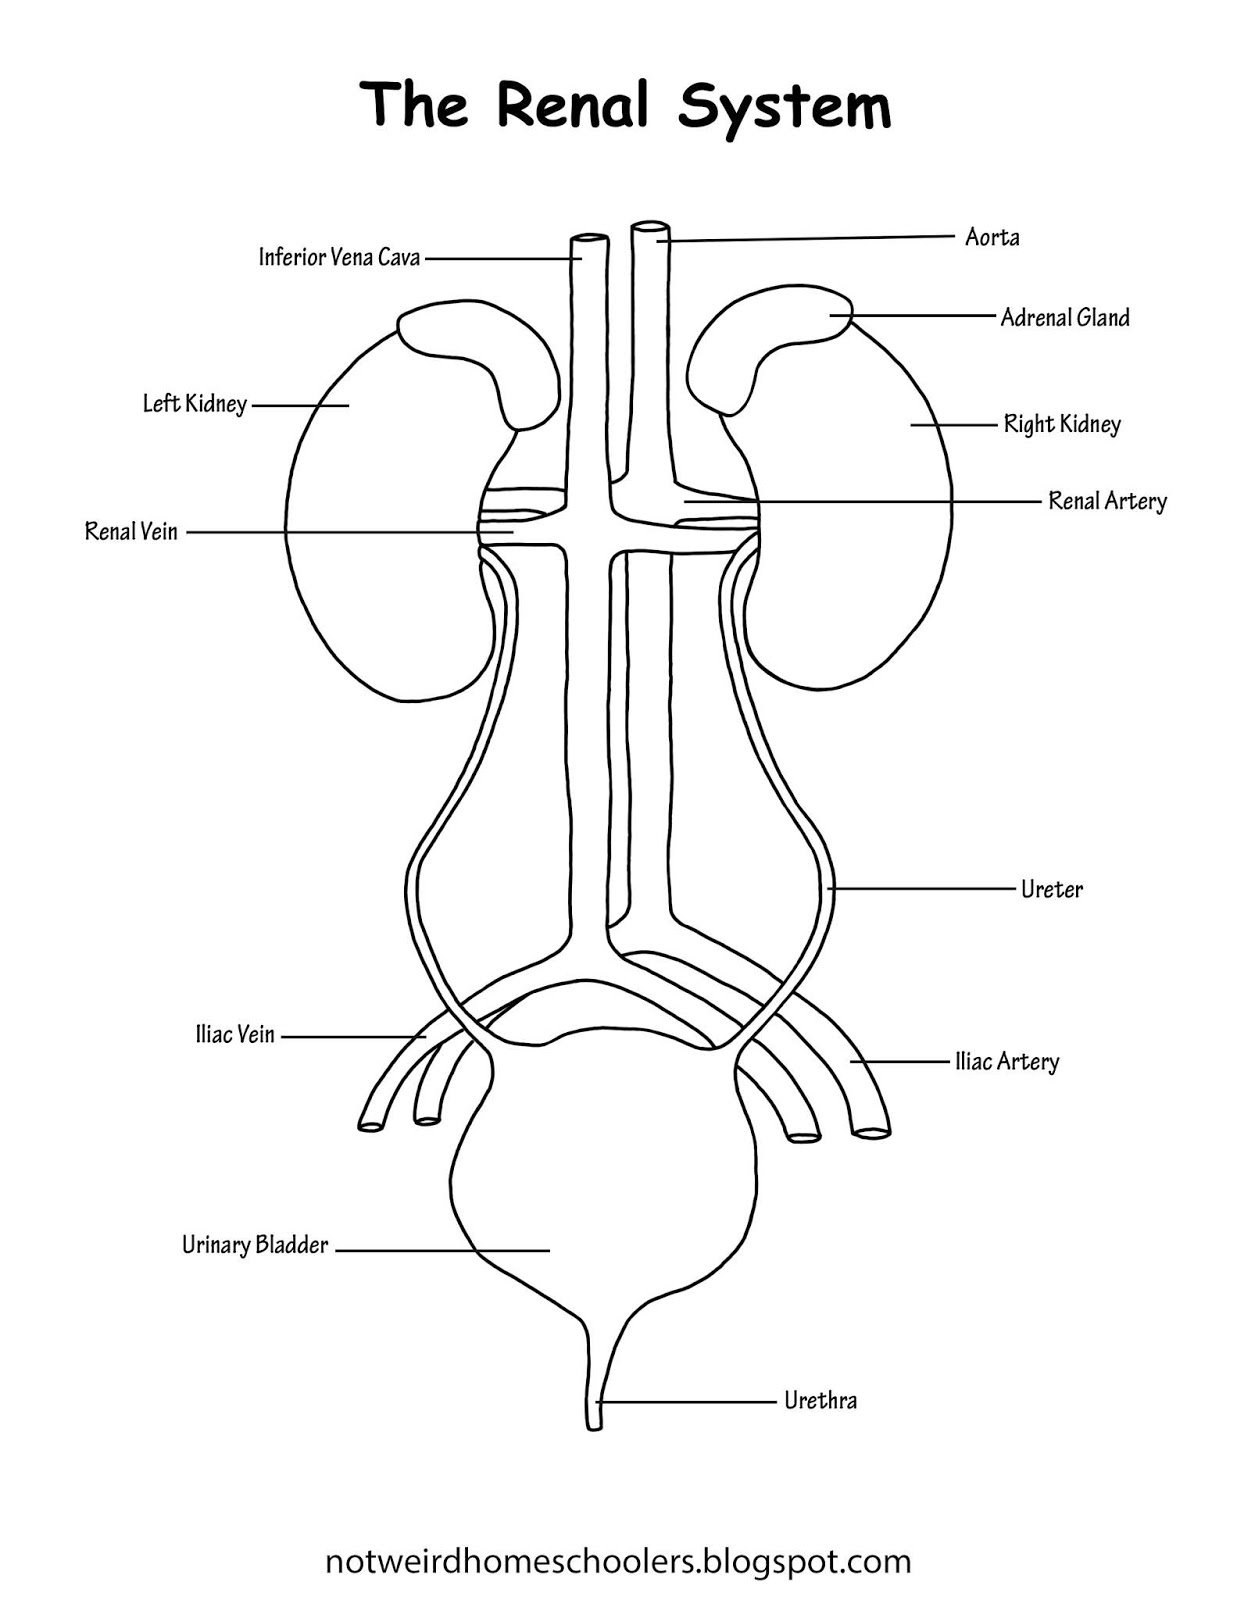 free-homeschooling-resource-the-renal-system-printable-worksheets